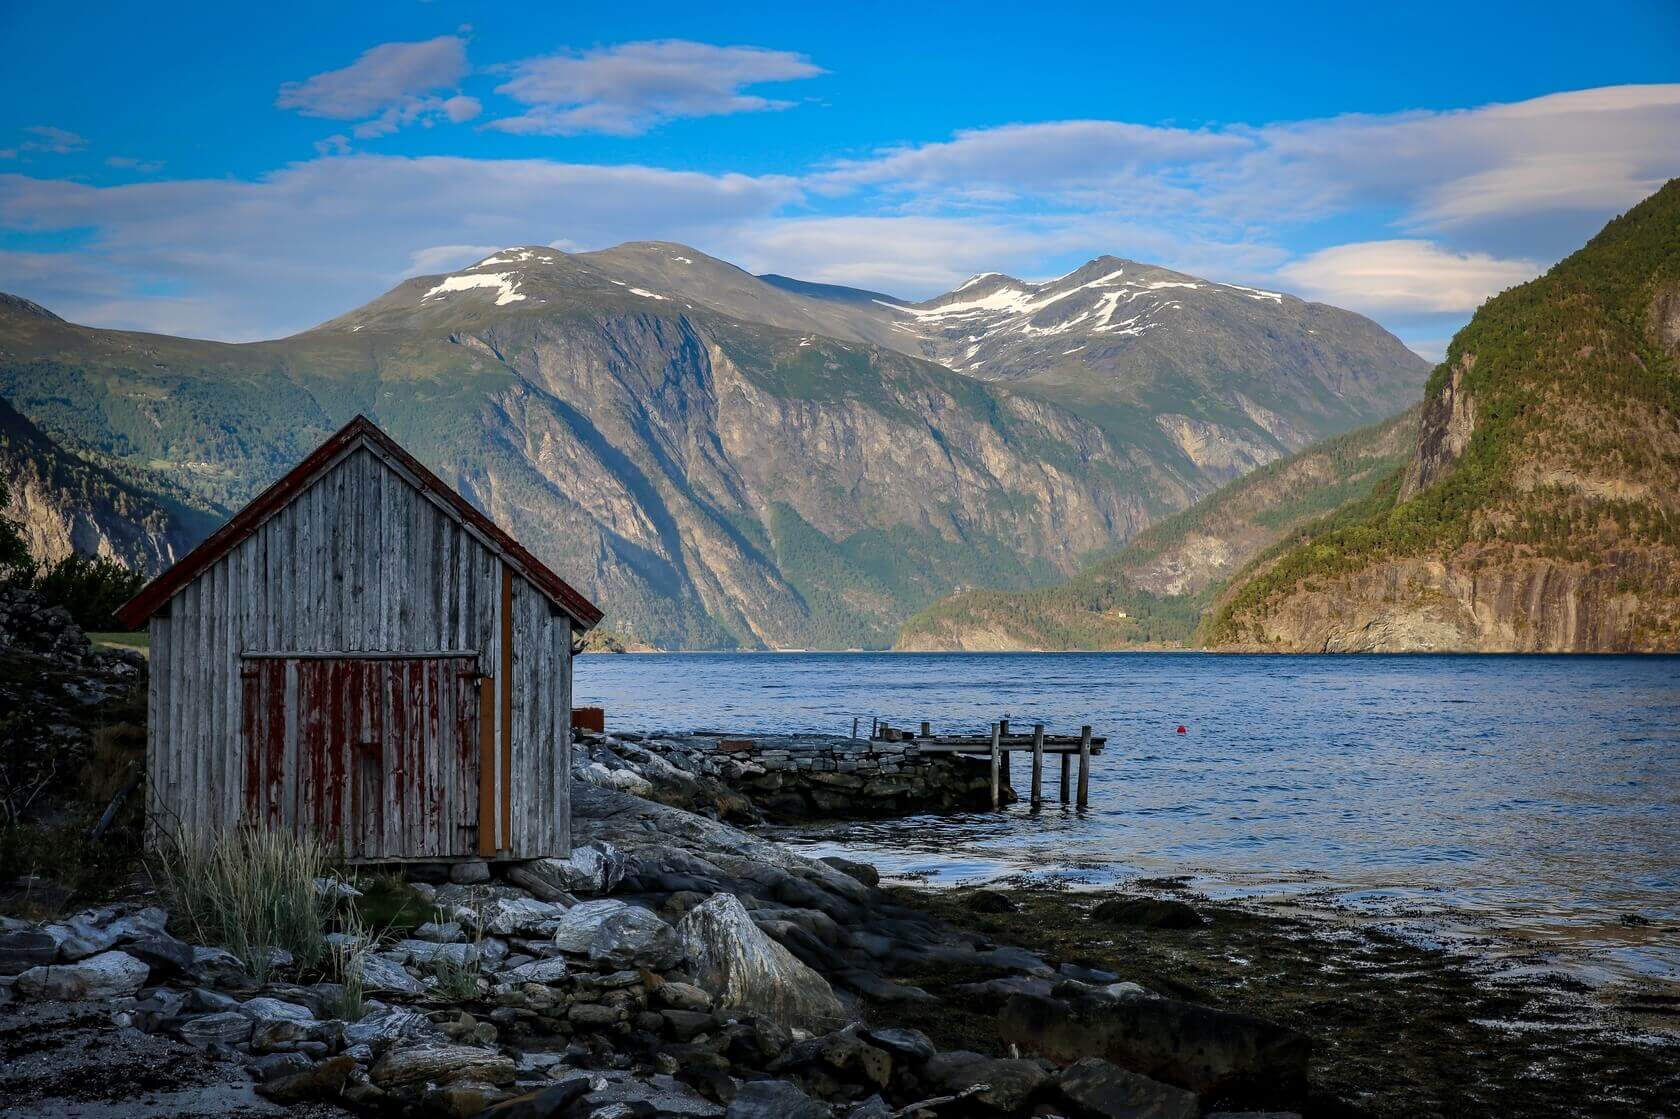 A landscape image of the mountains at Valldal overlooking a bay